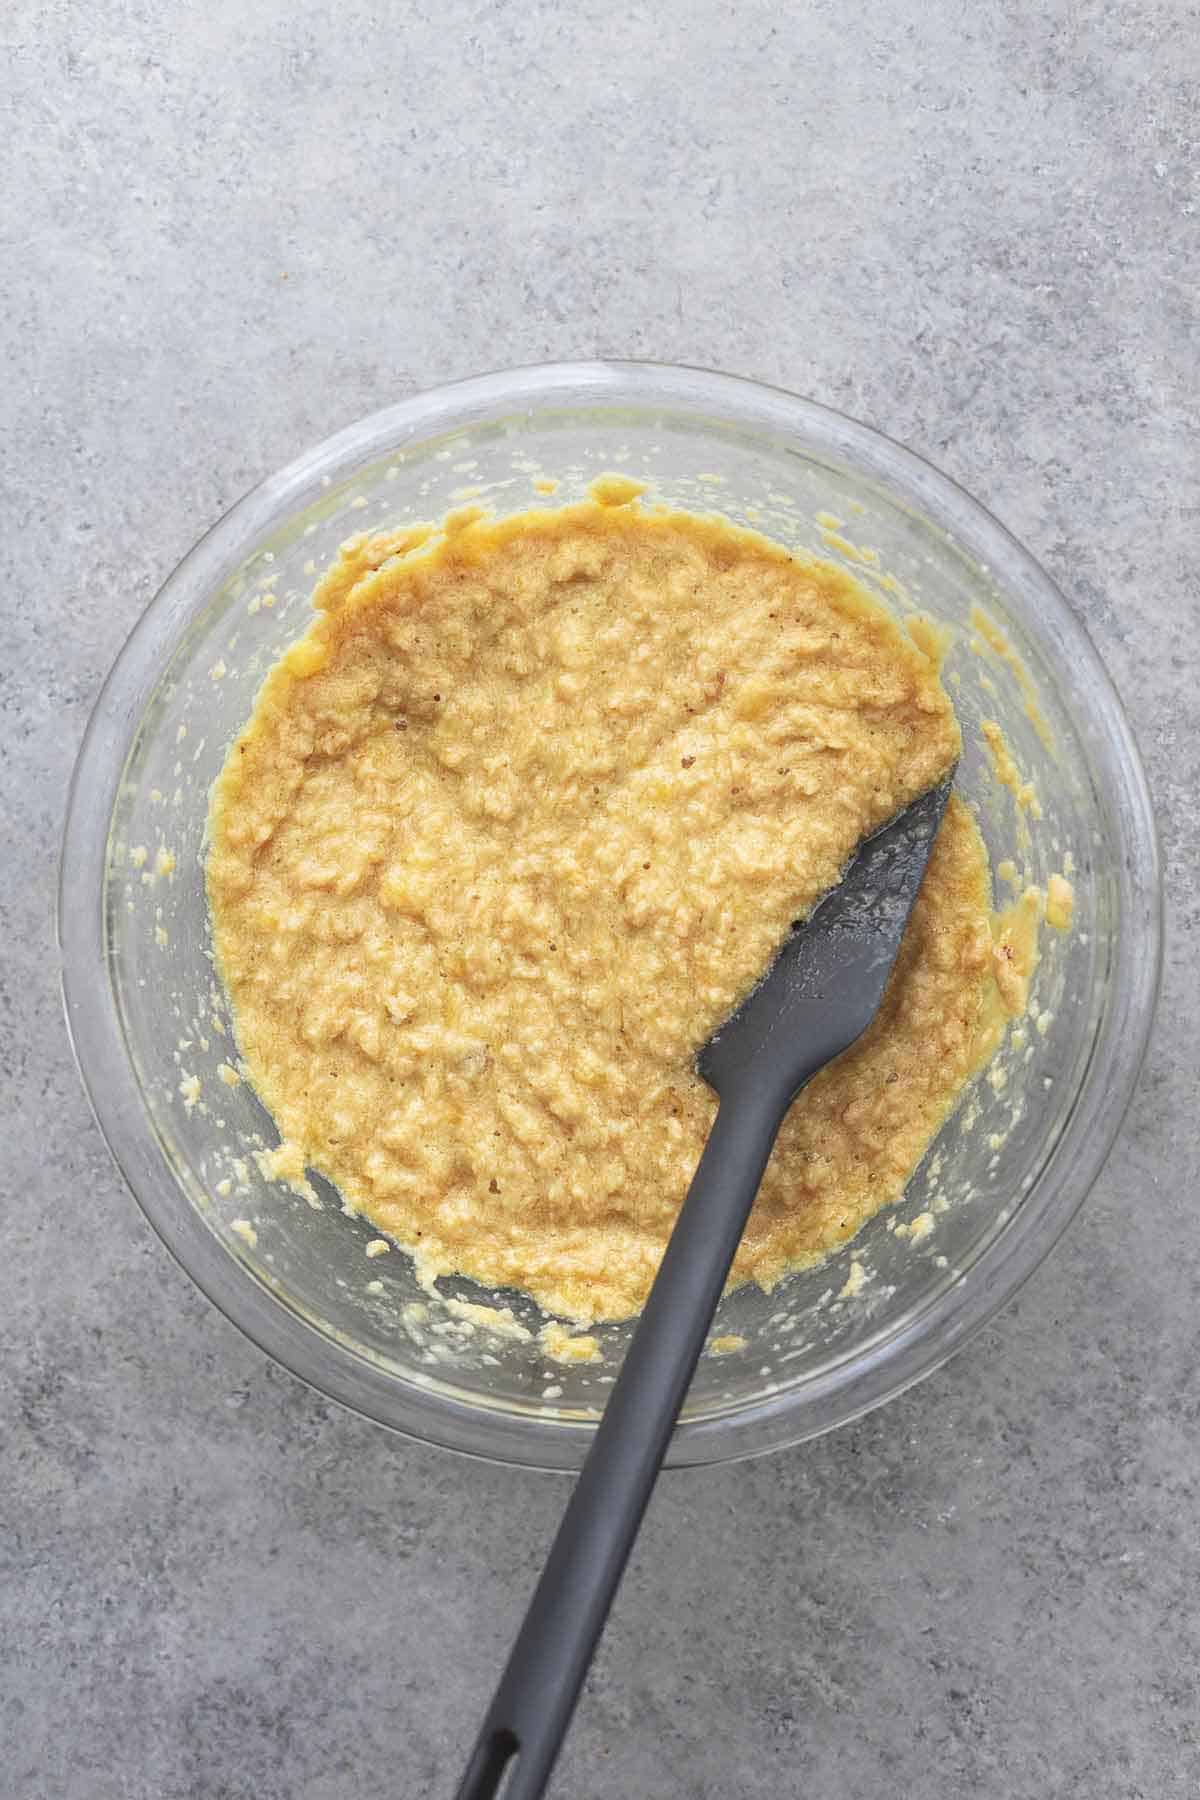 top view of mixed yellow cookie batter in a glass bowl with a gray spatula.